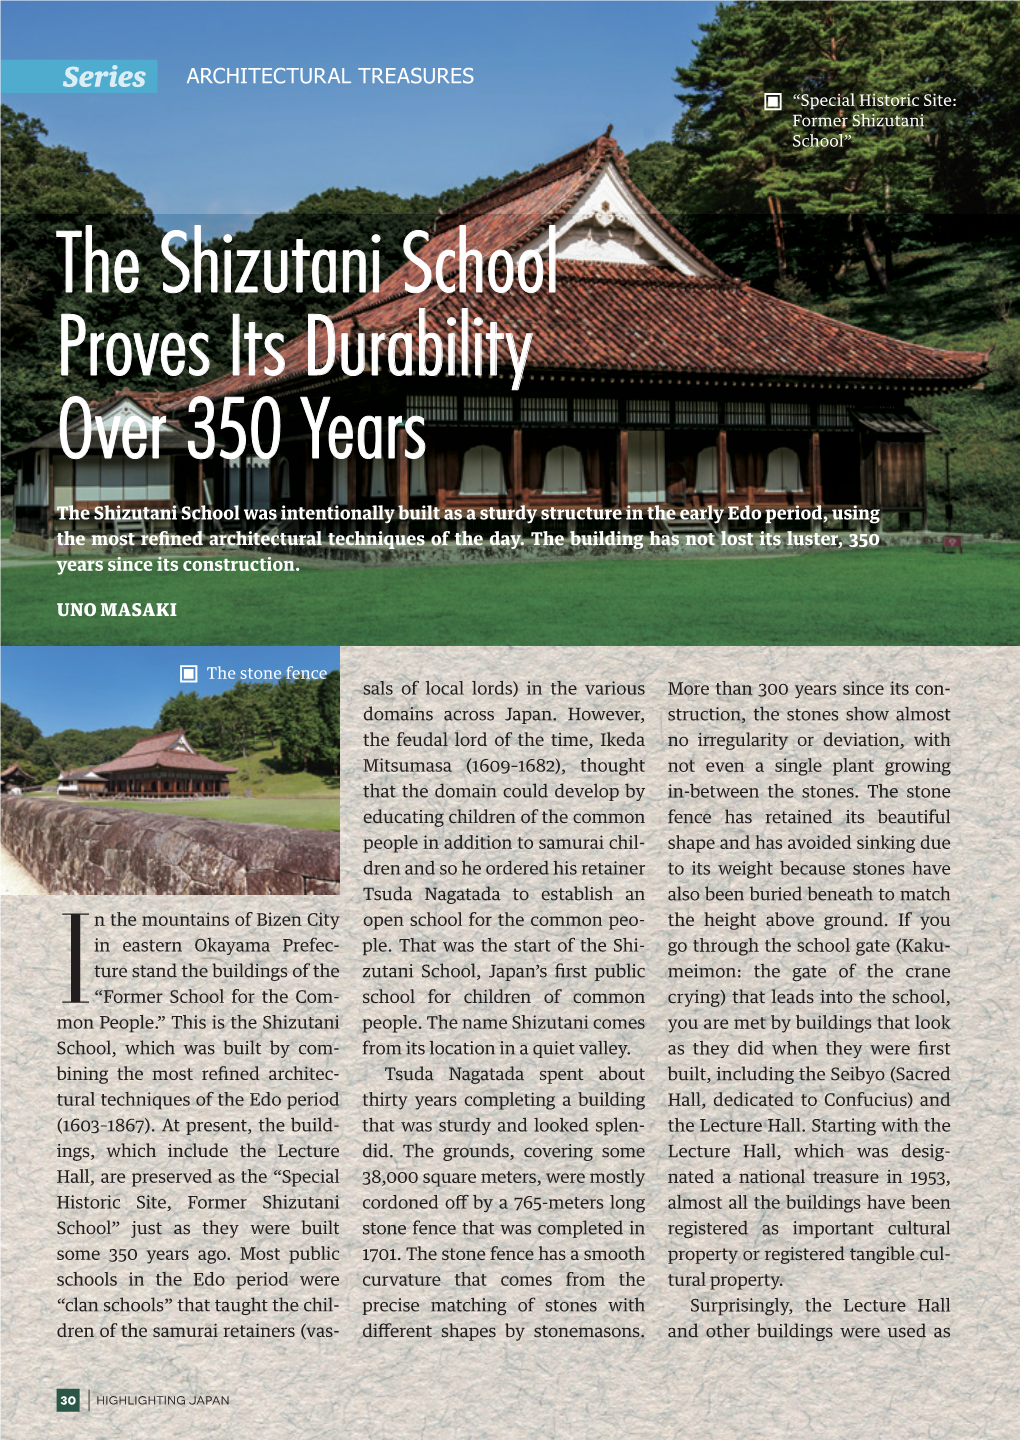 The Shizutani School Proves Its Durability Over 350 Years